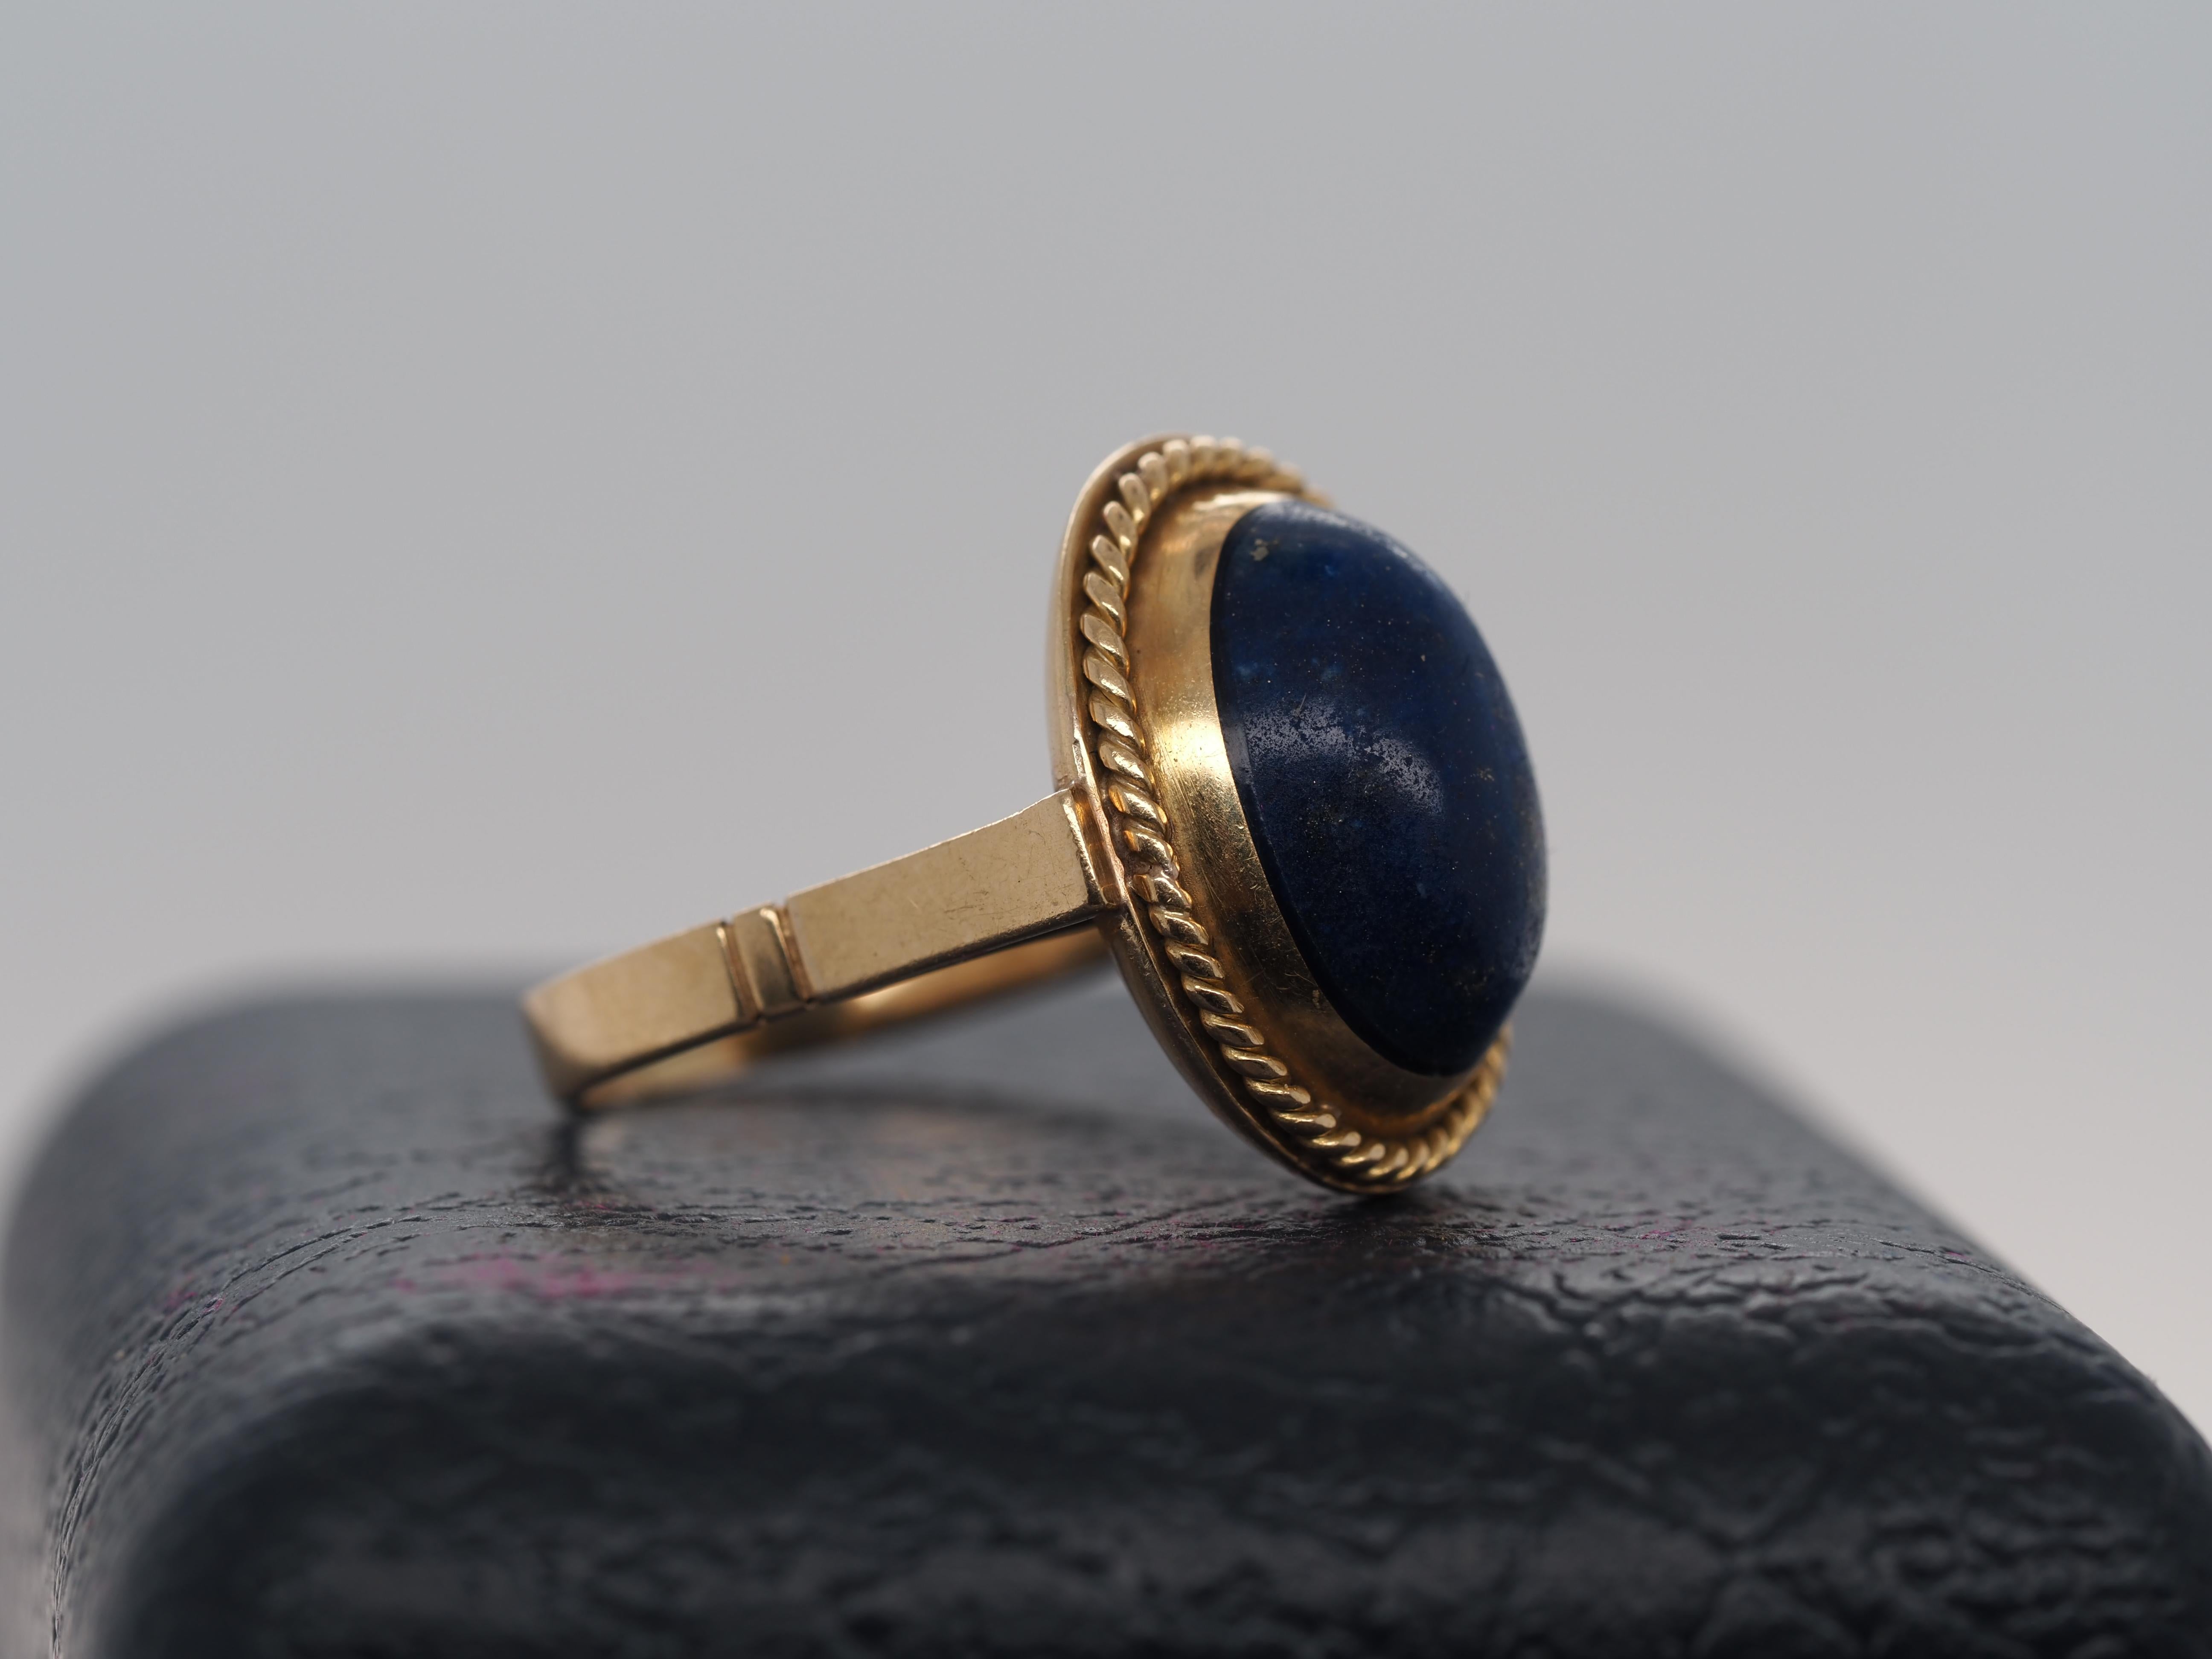 19k Yellow Gold Vintage Oval Shape Lapis Ring In Good Condition For Sale In Atlanta, GA